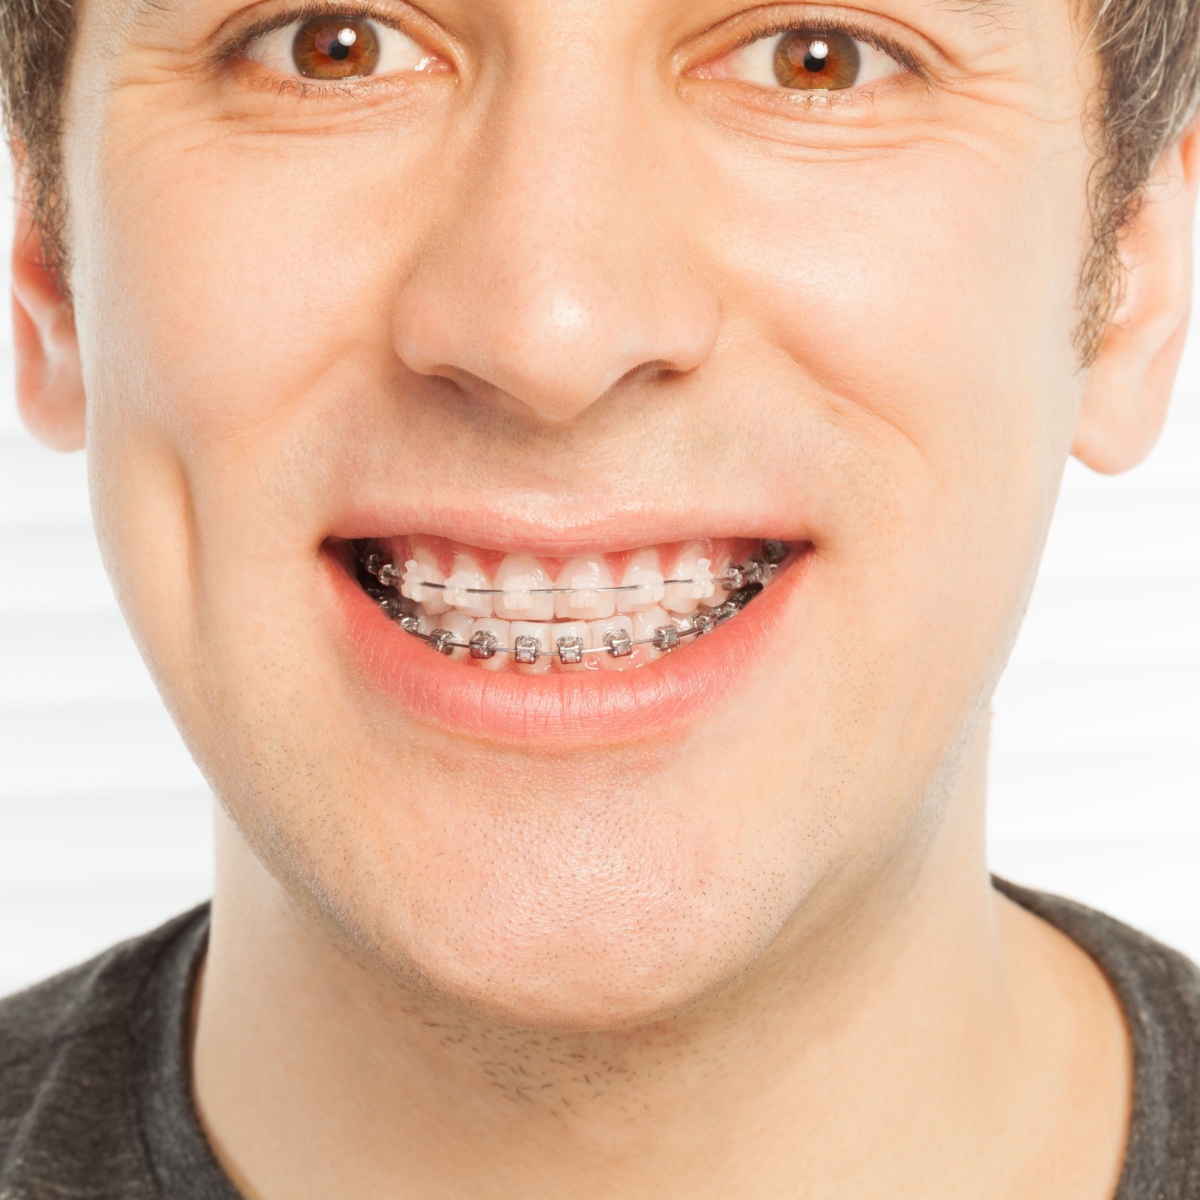 How to choose between ceramic or metal South Houston braces